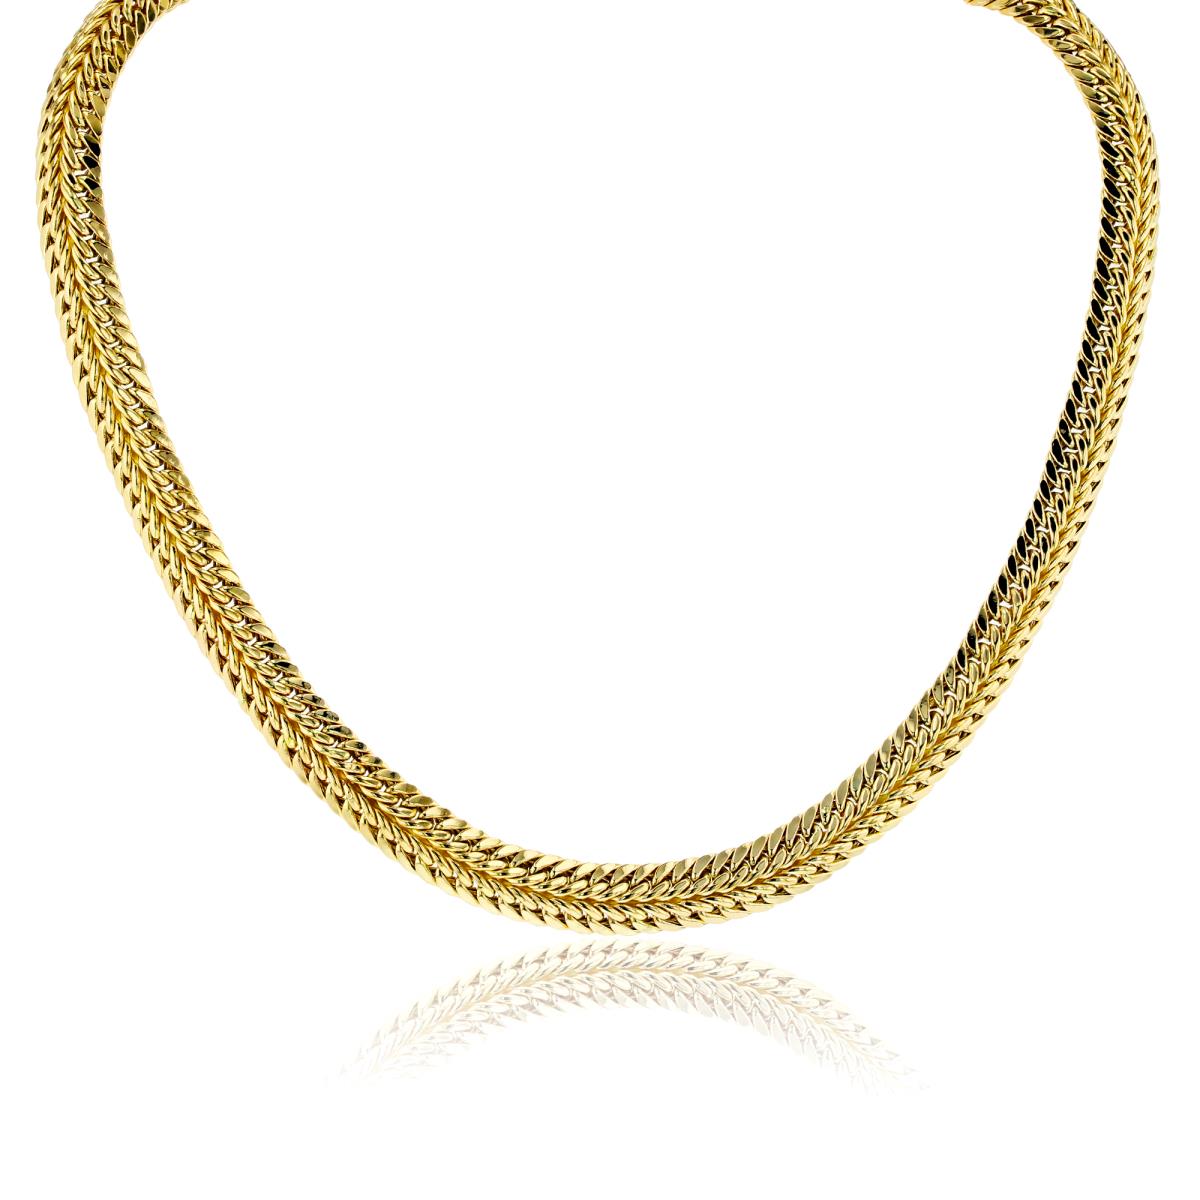 10K Yellow Gold Yellow Invert Linked Braid 17"Necklace